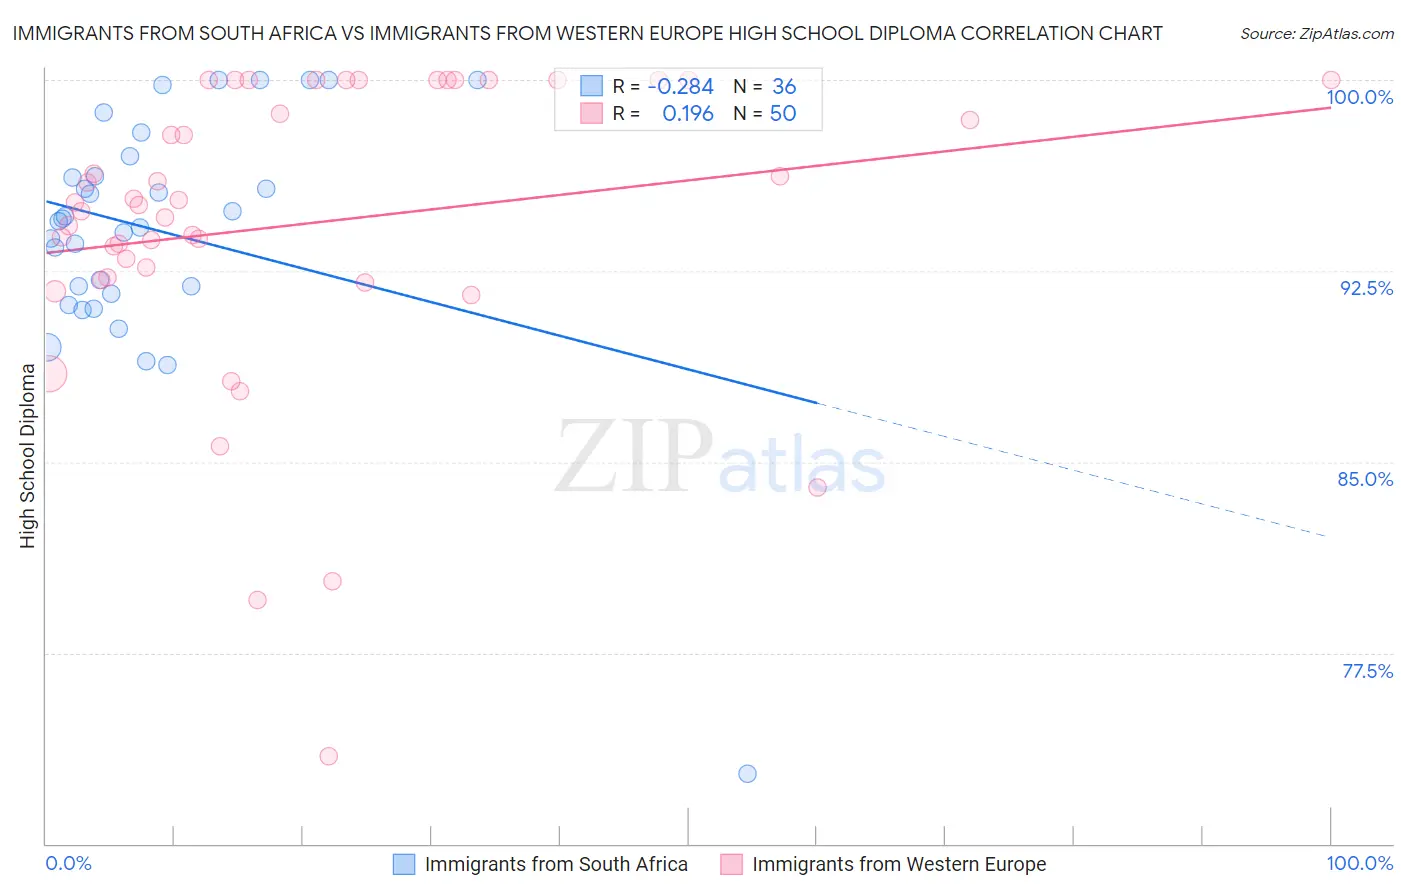 Immigrants from South Africa vs Immigrants from Western Europe High School Diploma